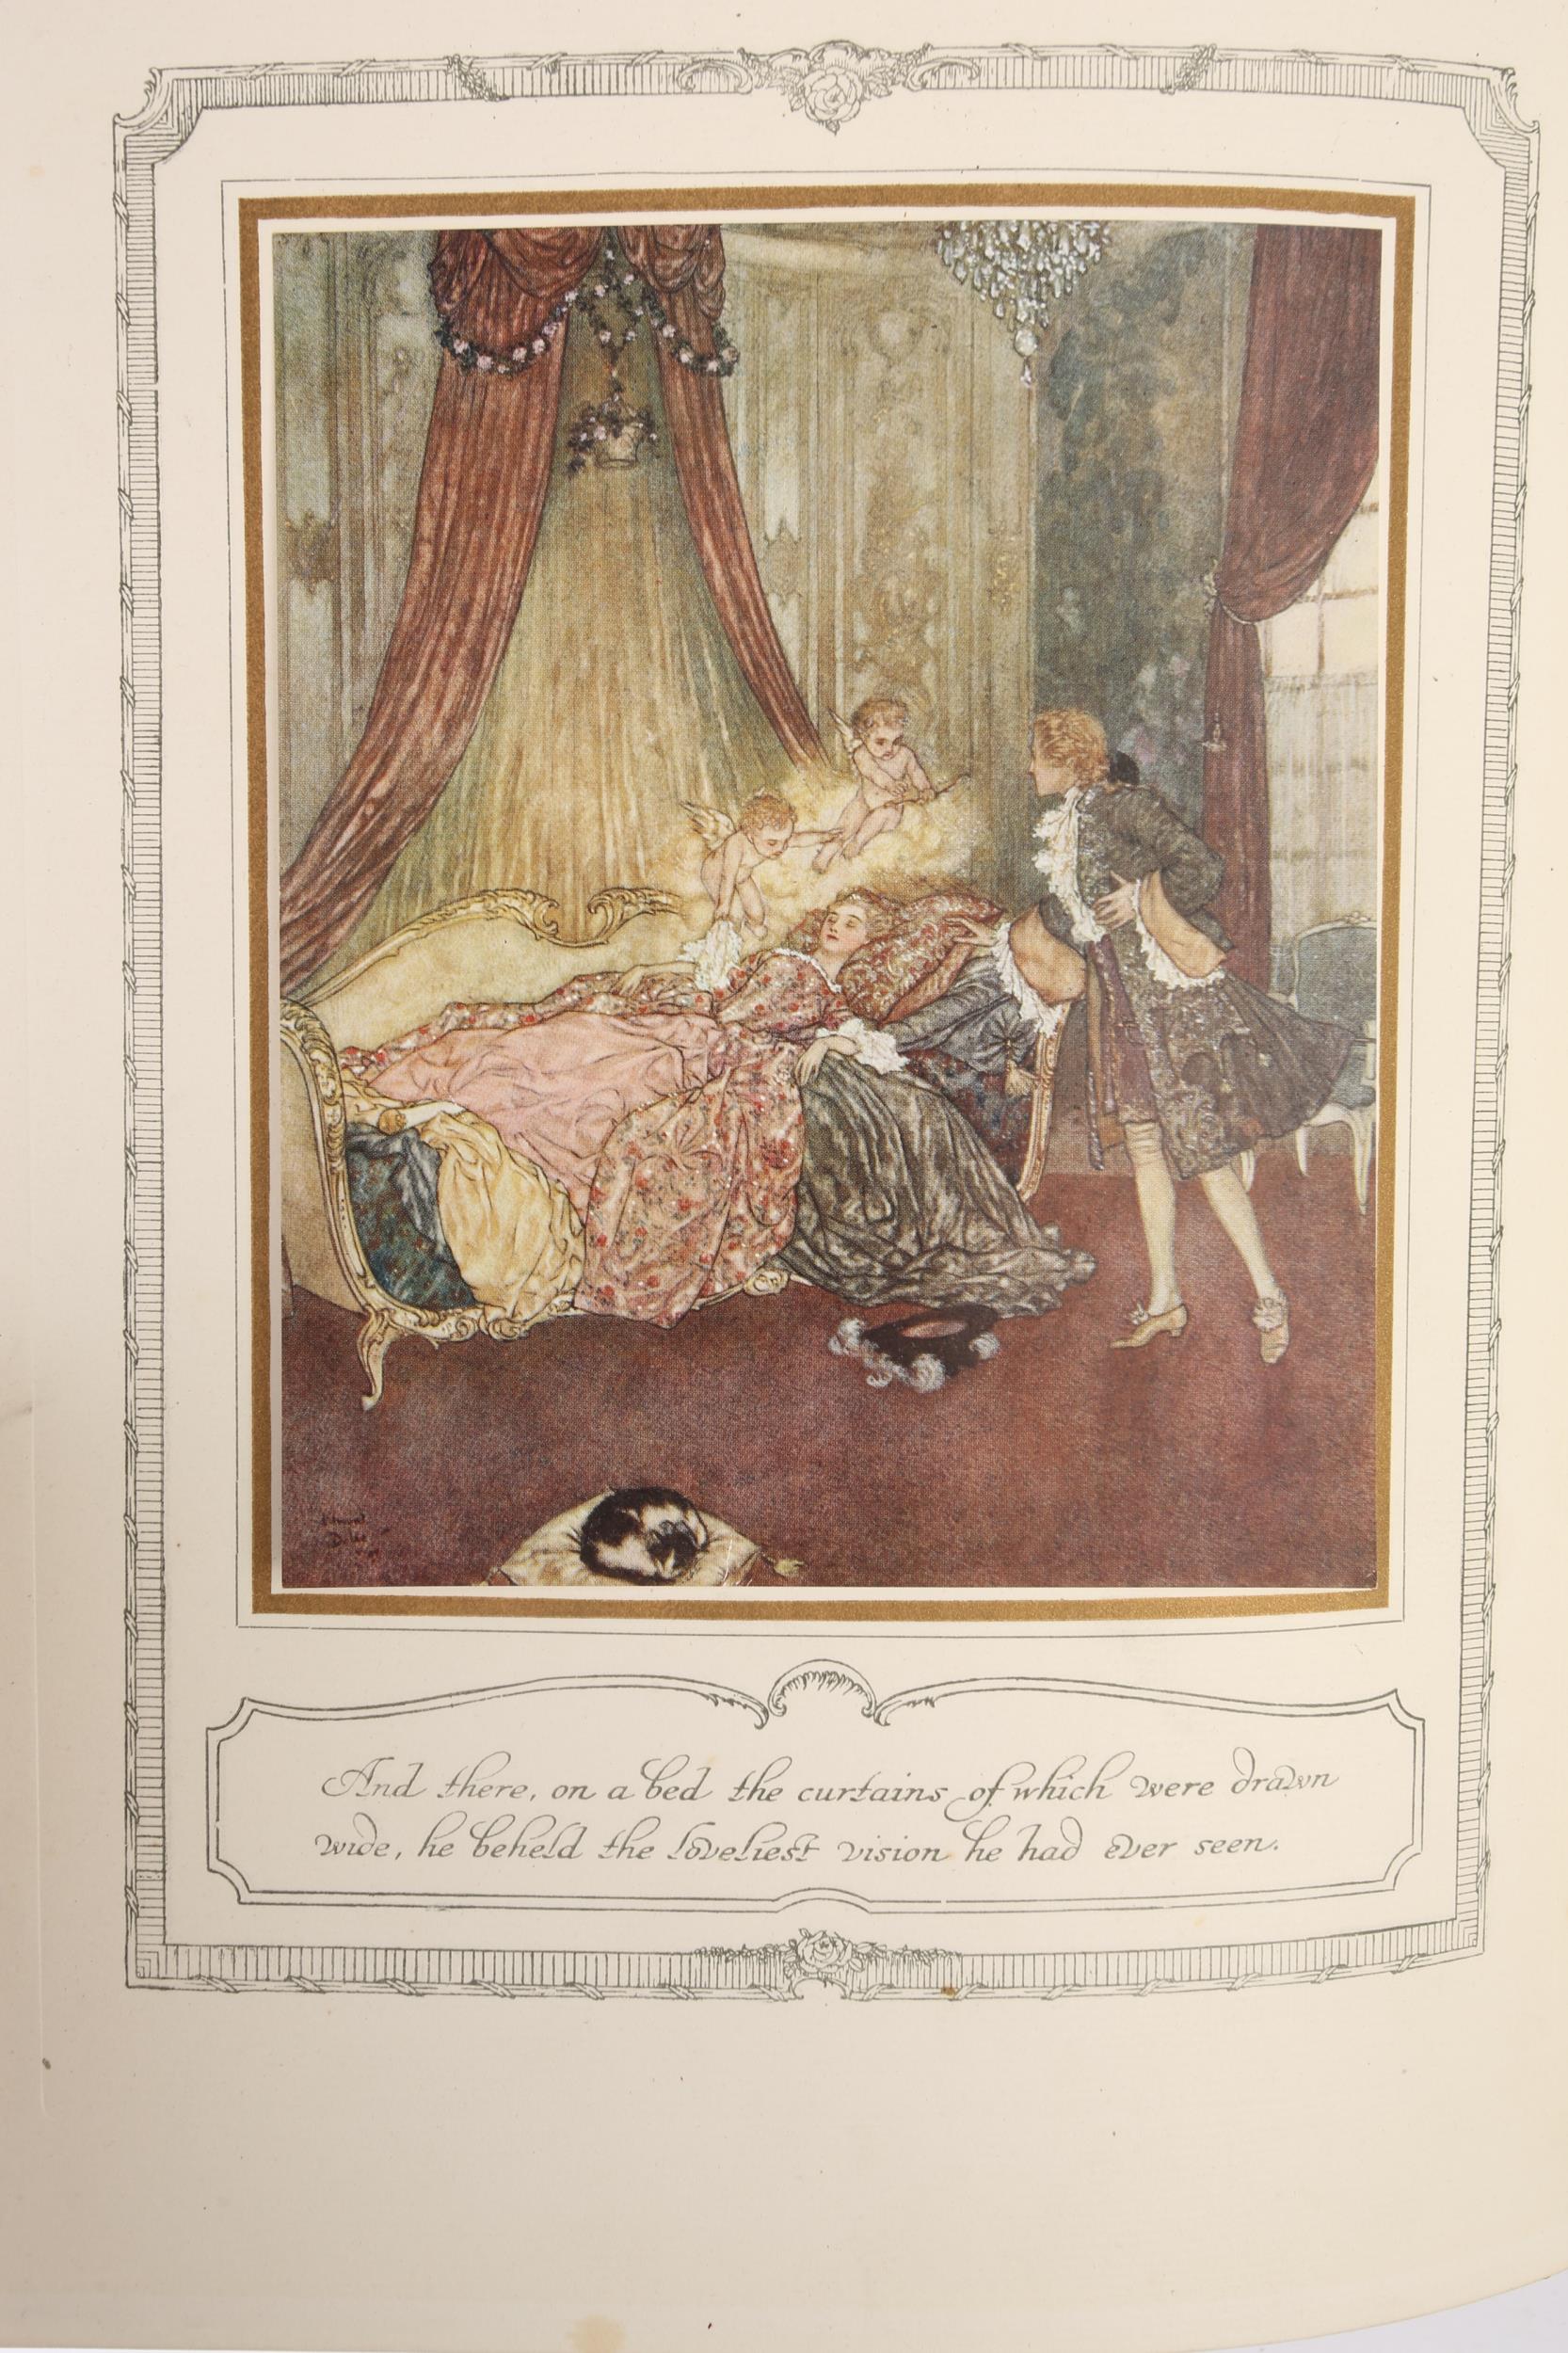 Arthur Quiller-Couch, 'The Sleeping Beauty and Other Fairy Tales', London, Hodder & Stoughton, - Image 20 of 21